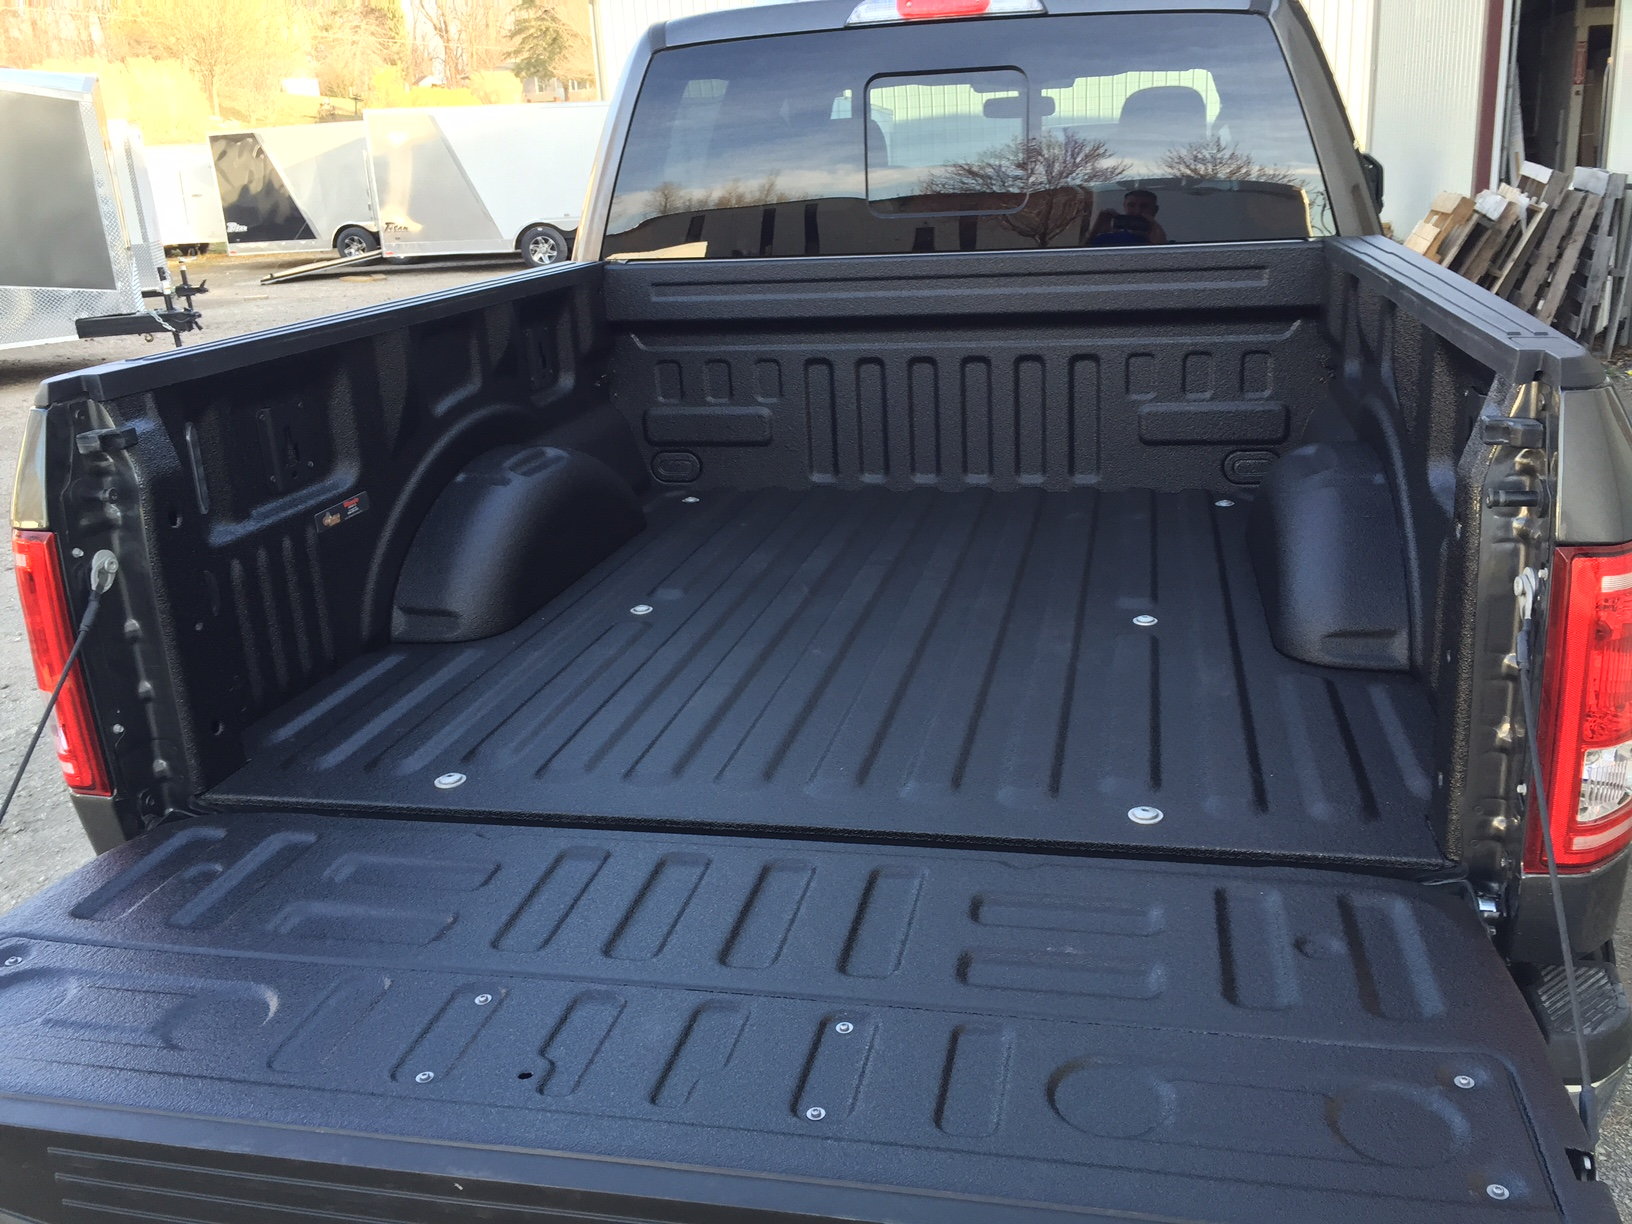 armadillo spray in bed liner - ford f150 forum - community of ford